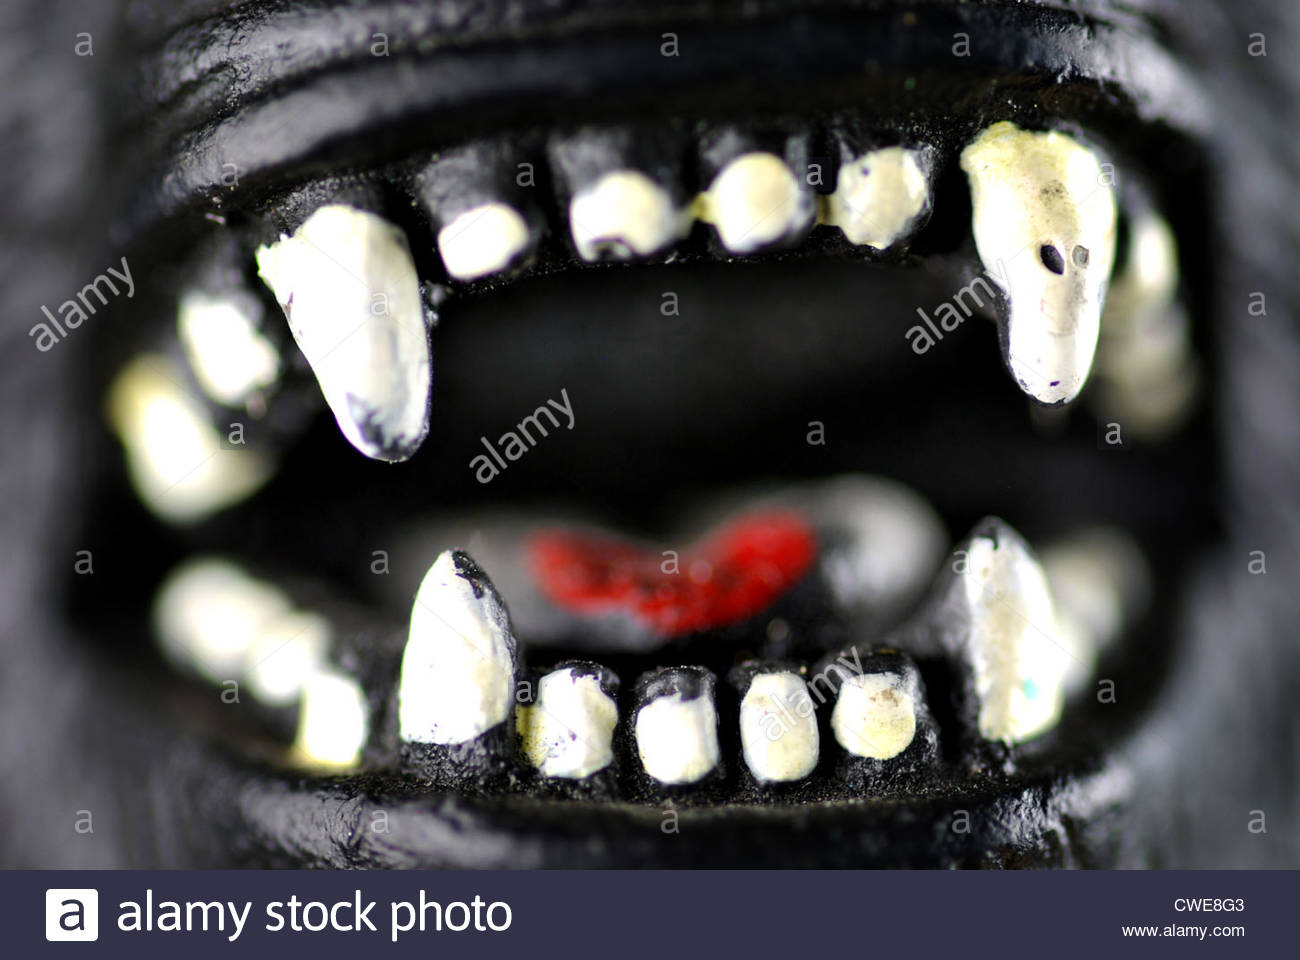 Parts Of The Tongue Stock Photos & Parts Of The Tongue Stock Images - Alamy